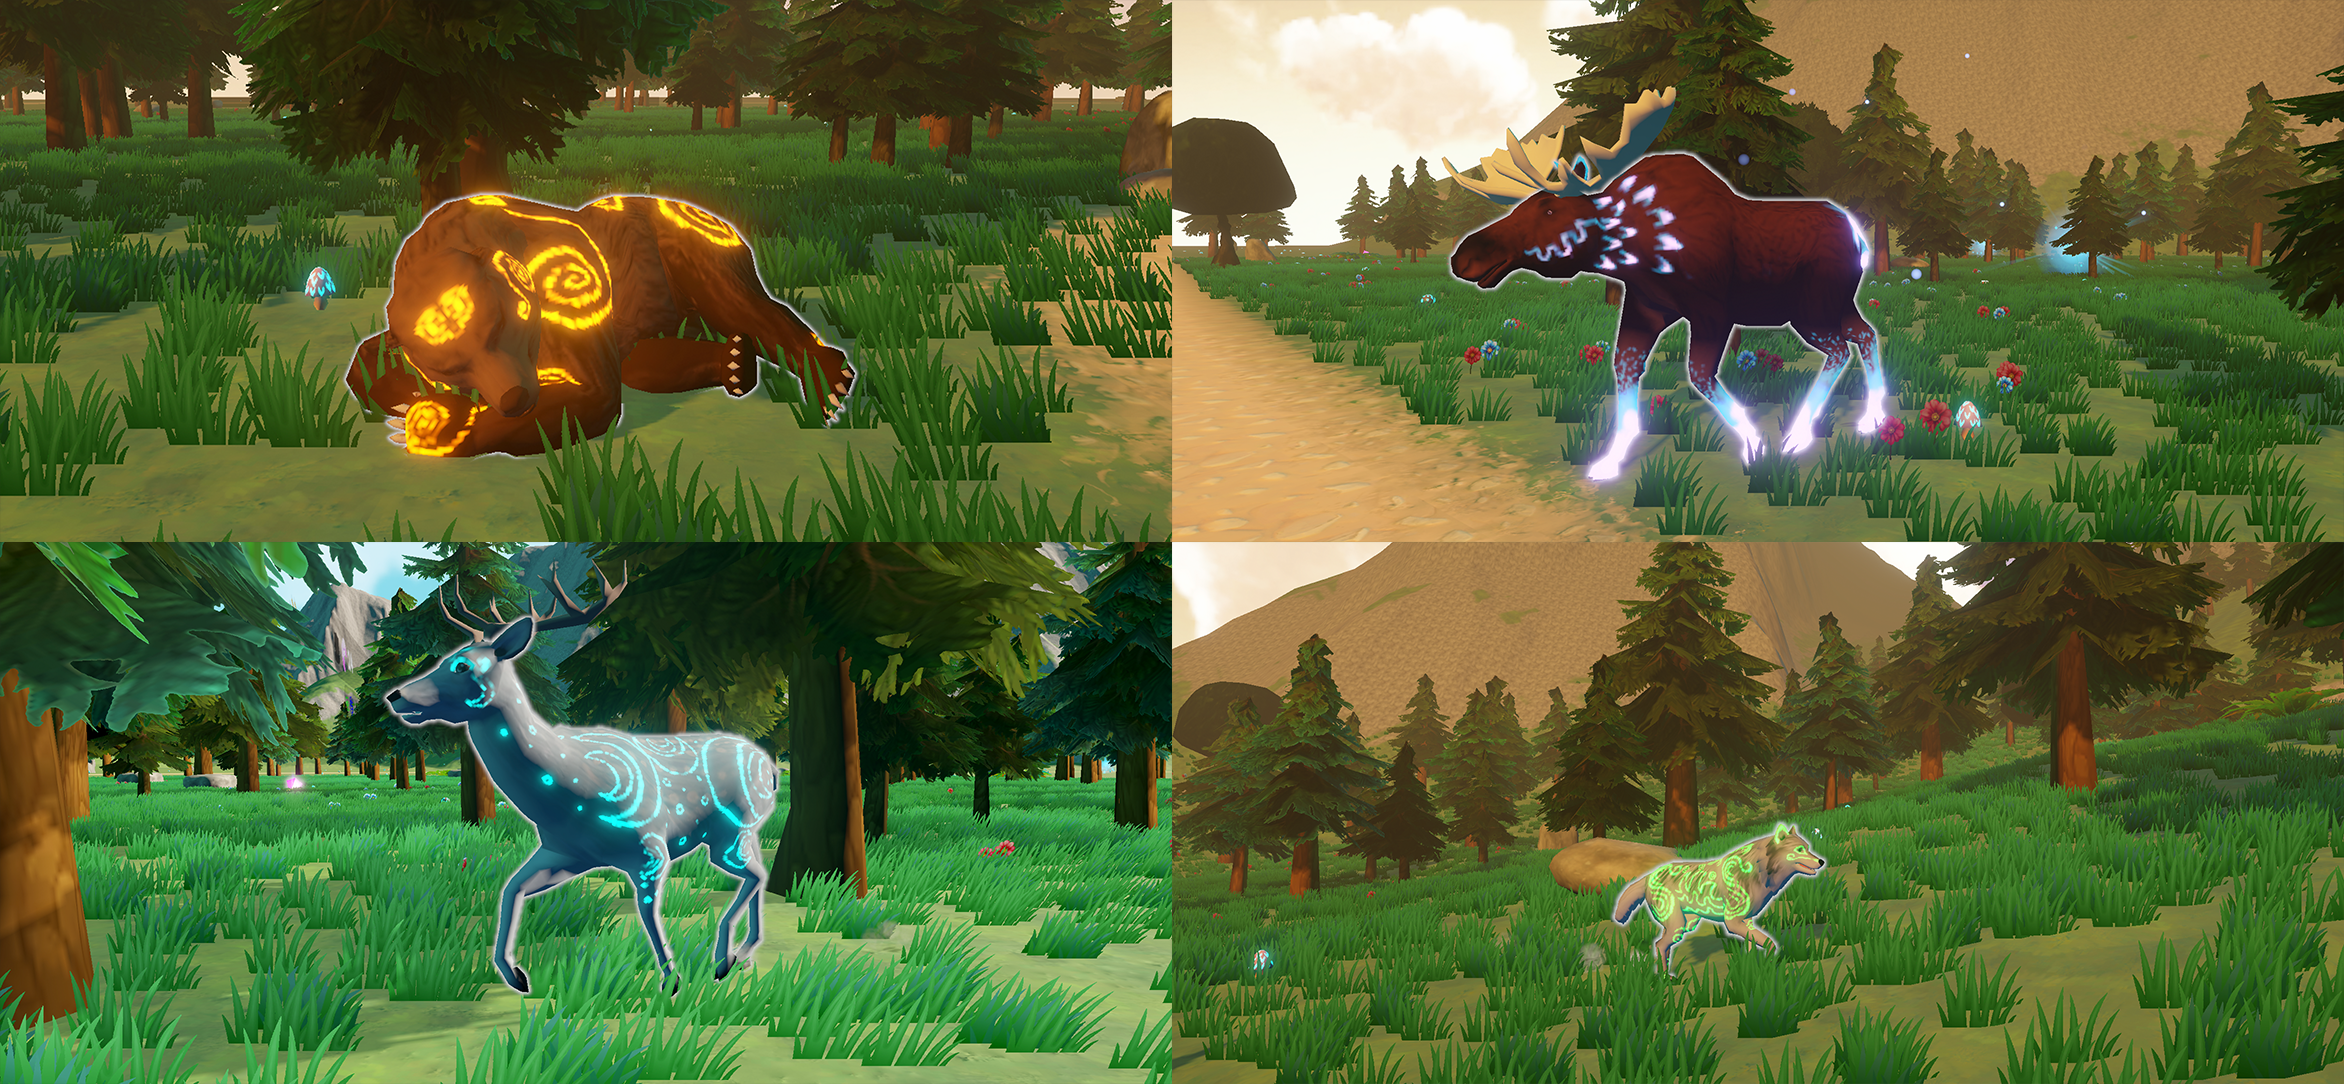 New Animal Skins - Unlock Azoa’s collection of over 60 new animal skins for the animal friends you encounter in Azoa, adding diversity and color into your gaming experience!